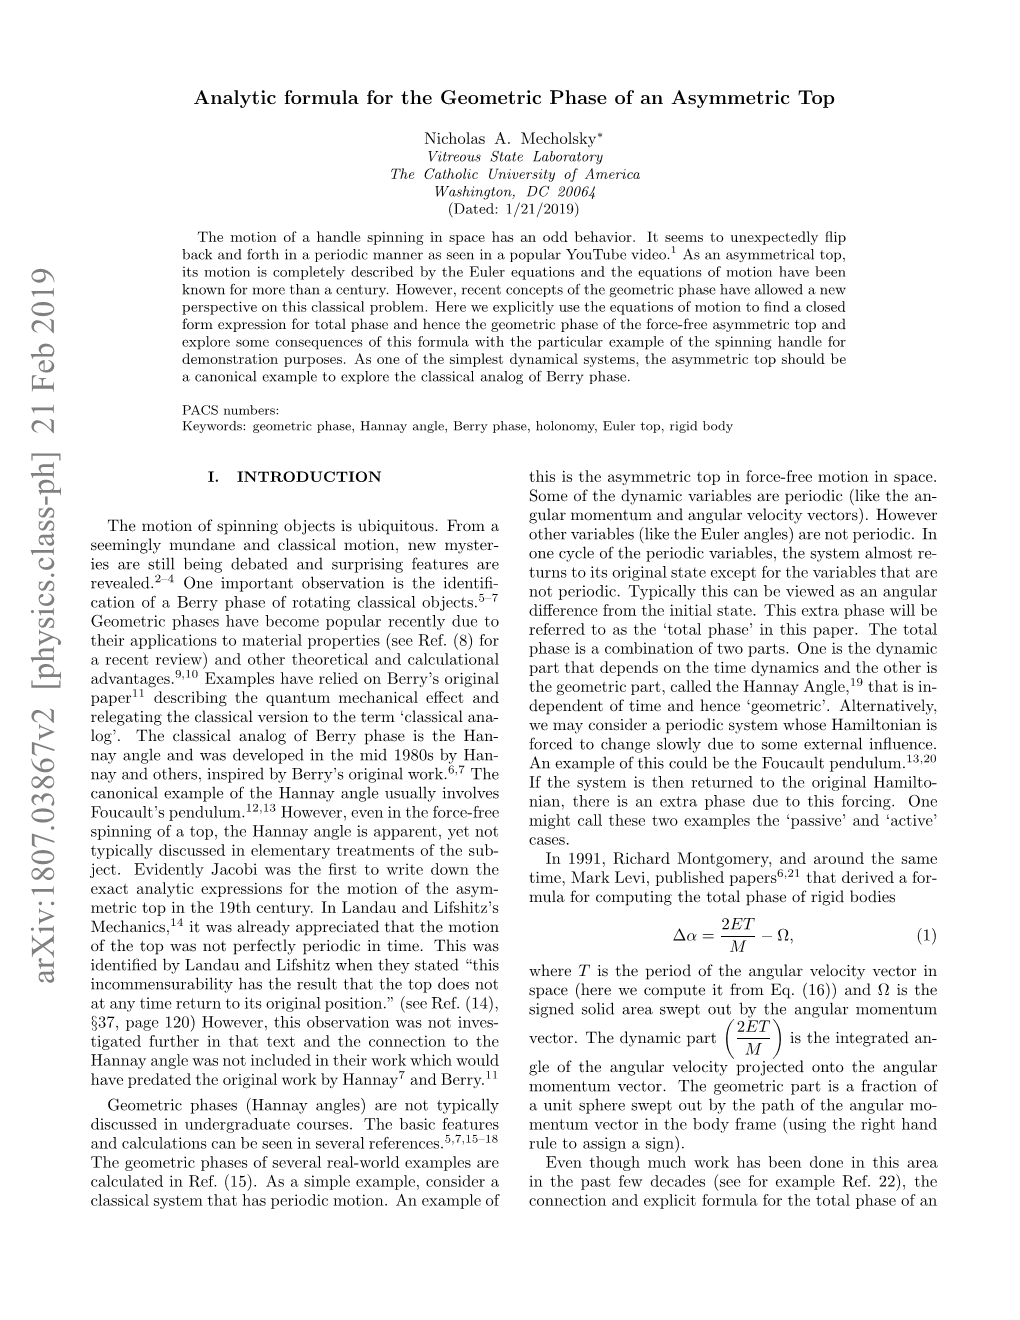 Arxiv:1807.03867V2 [Physics.Class-Ph] 21 Feb 2019 Eetrve)Adohrtertcladcalculational Paper and Theoretical Other for Advantages